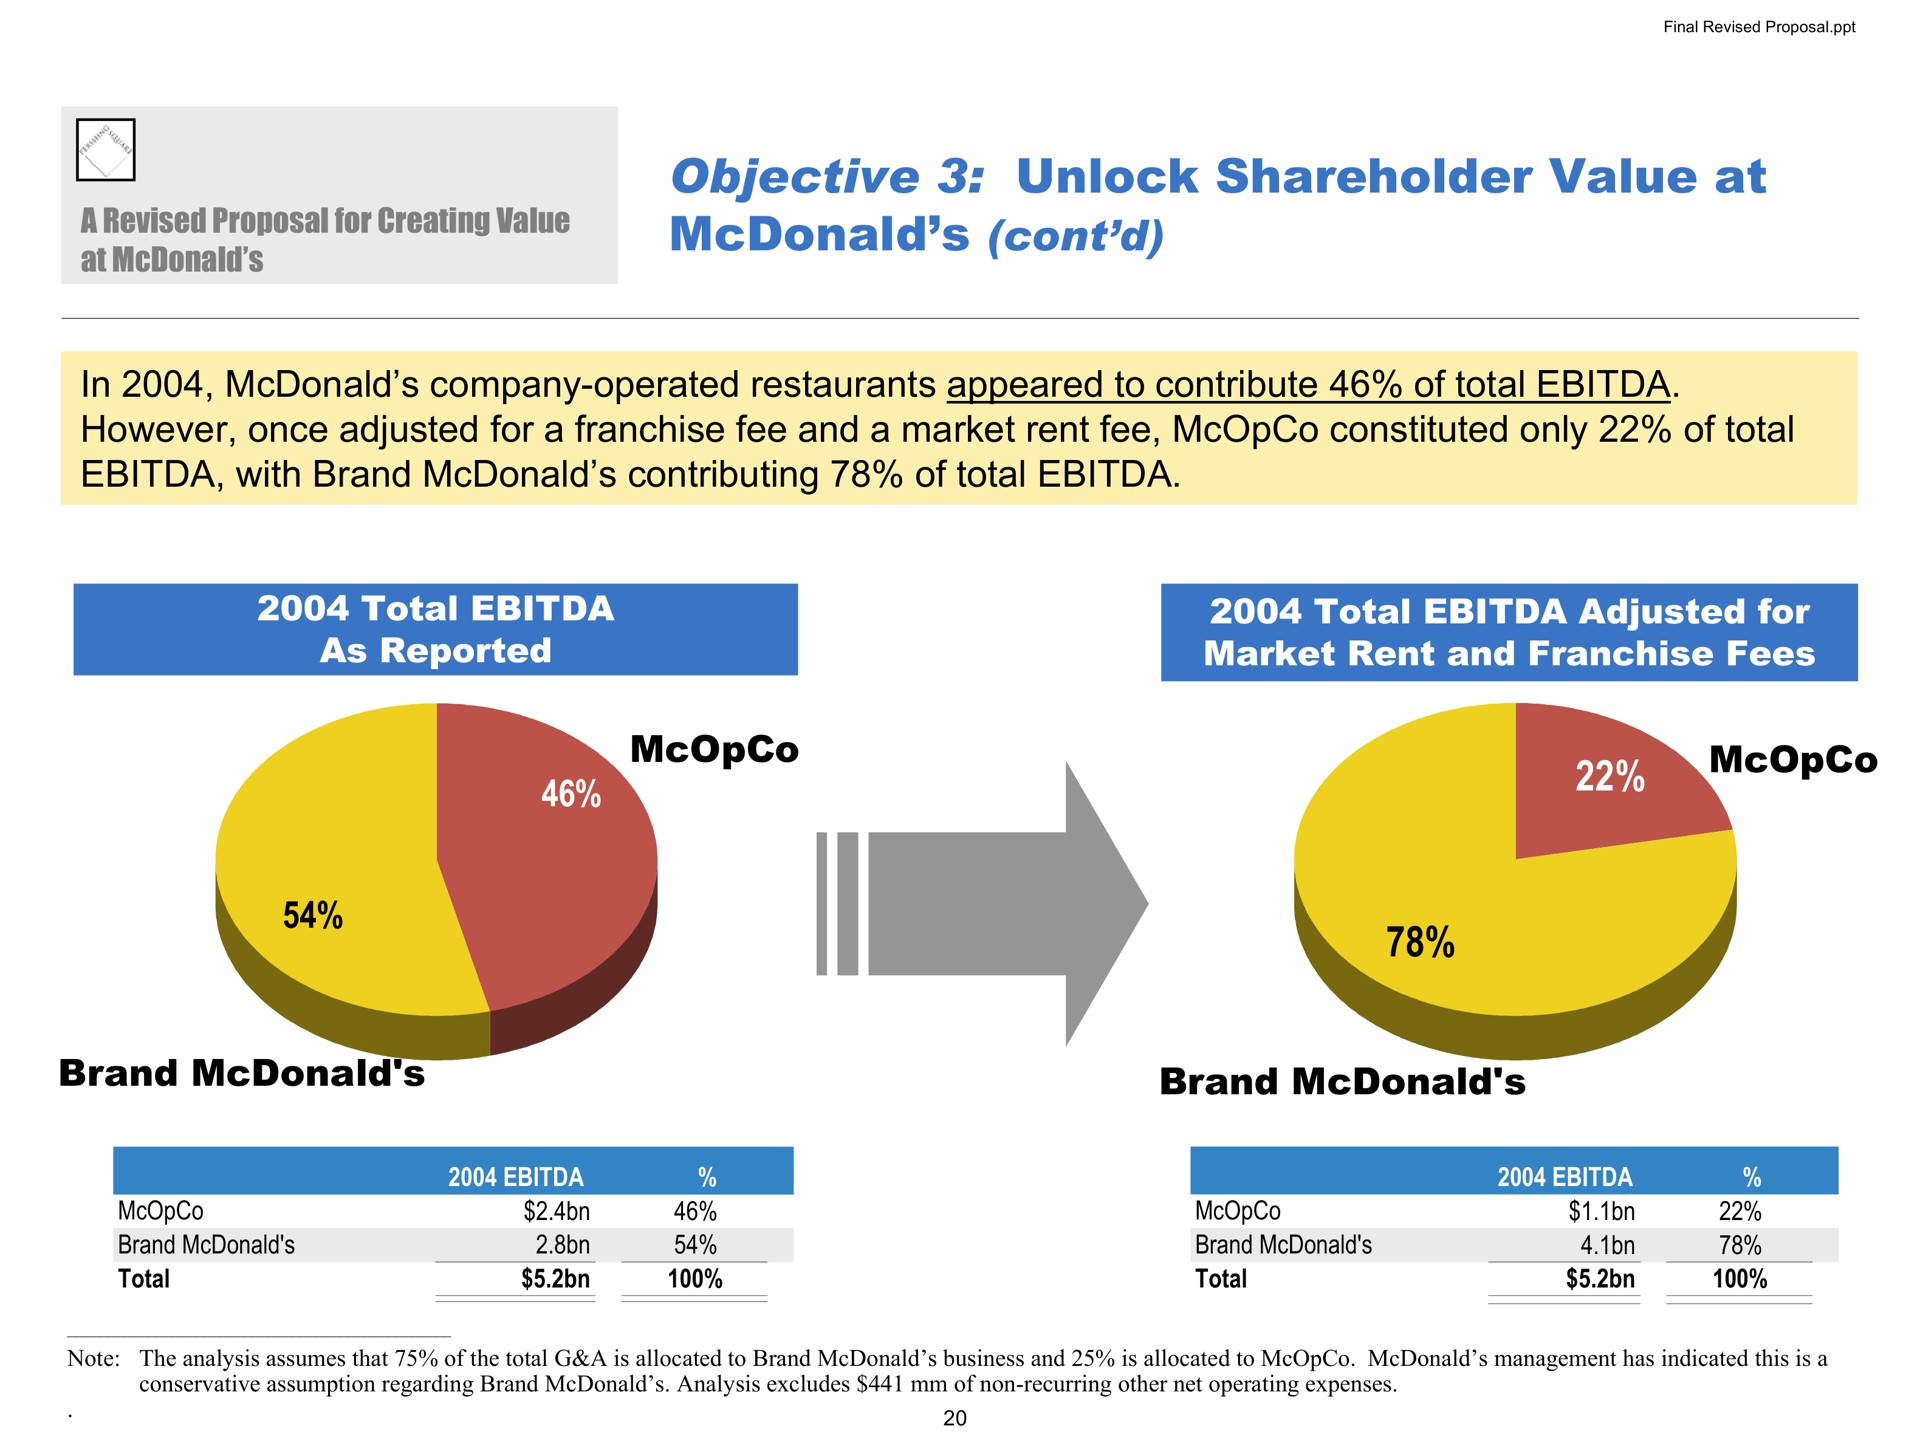 objective unlock shareholder value at in company operated restaurants appeared to contribute of total however once adjusted for a franchise fee and a market rent fee constituted only of total with brand contributing of total total as reported total adjusted for market rent and franchise fees brand brand on | Pershing Square